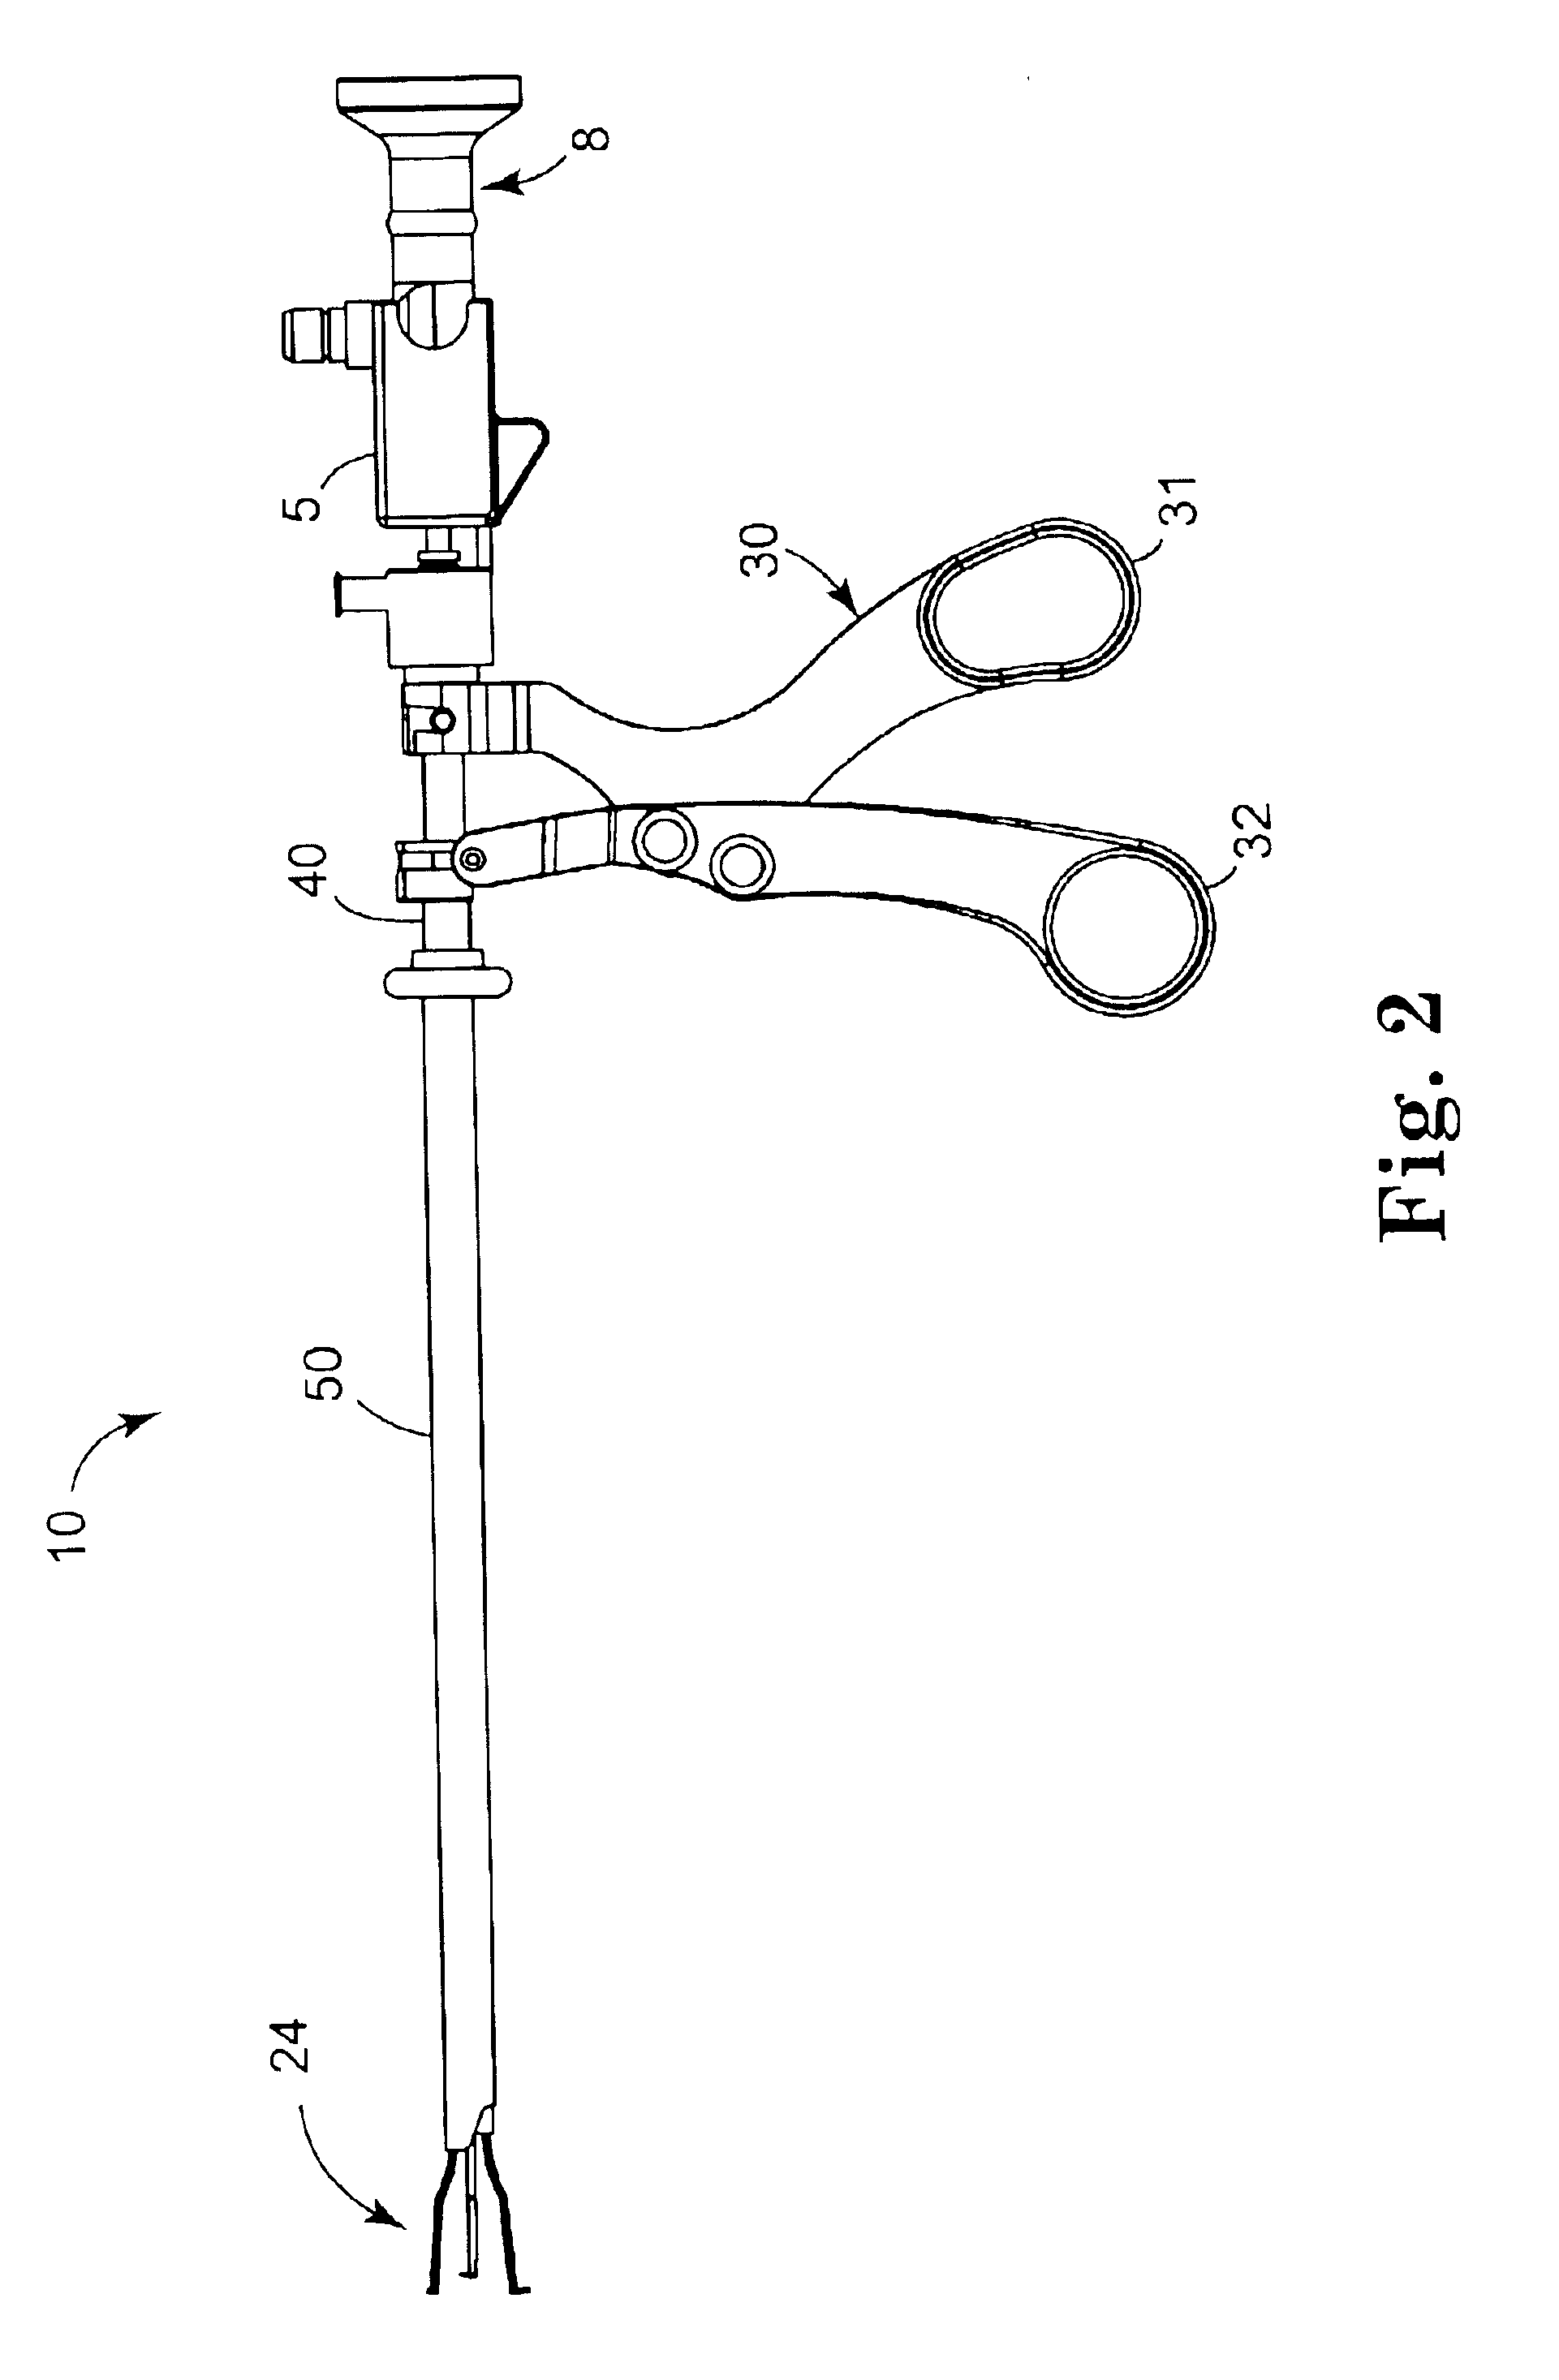 Foreign body retrieval device and method